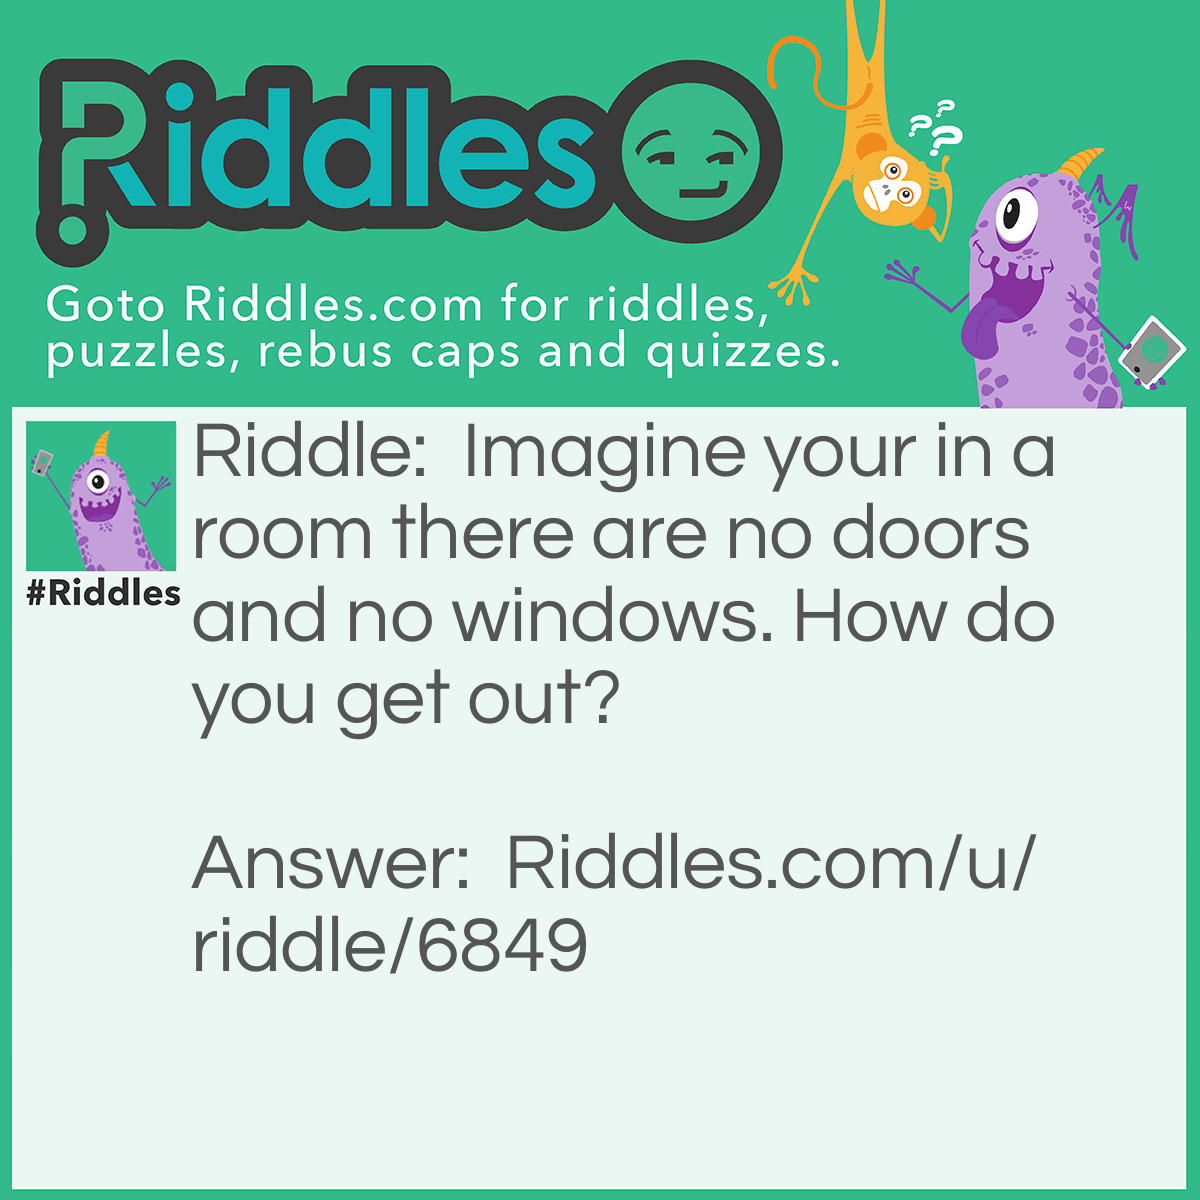 Riddle: Imagine your in a room there are no doors and no windows. How do you get out? Answer: Stop imaging.